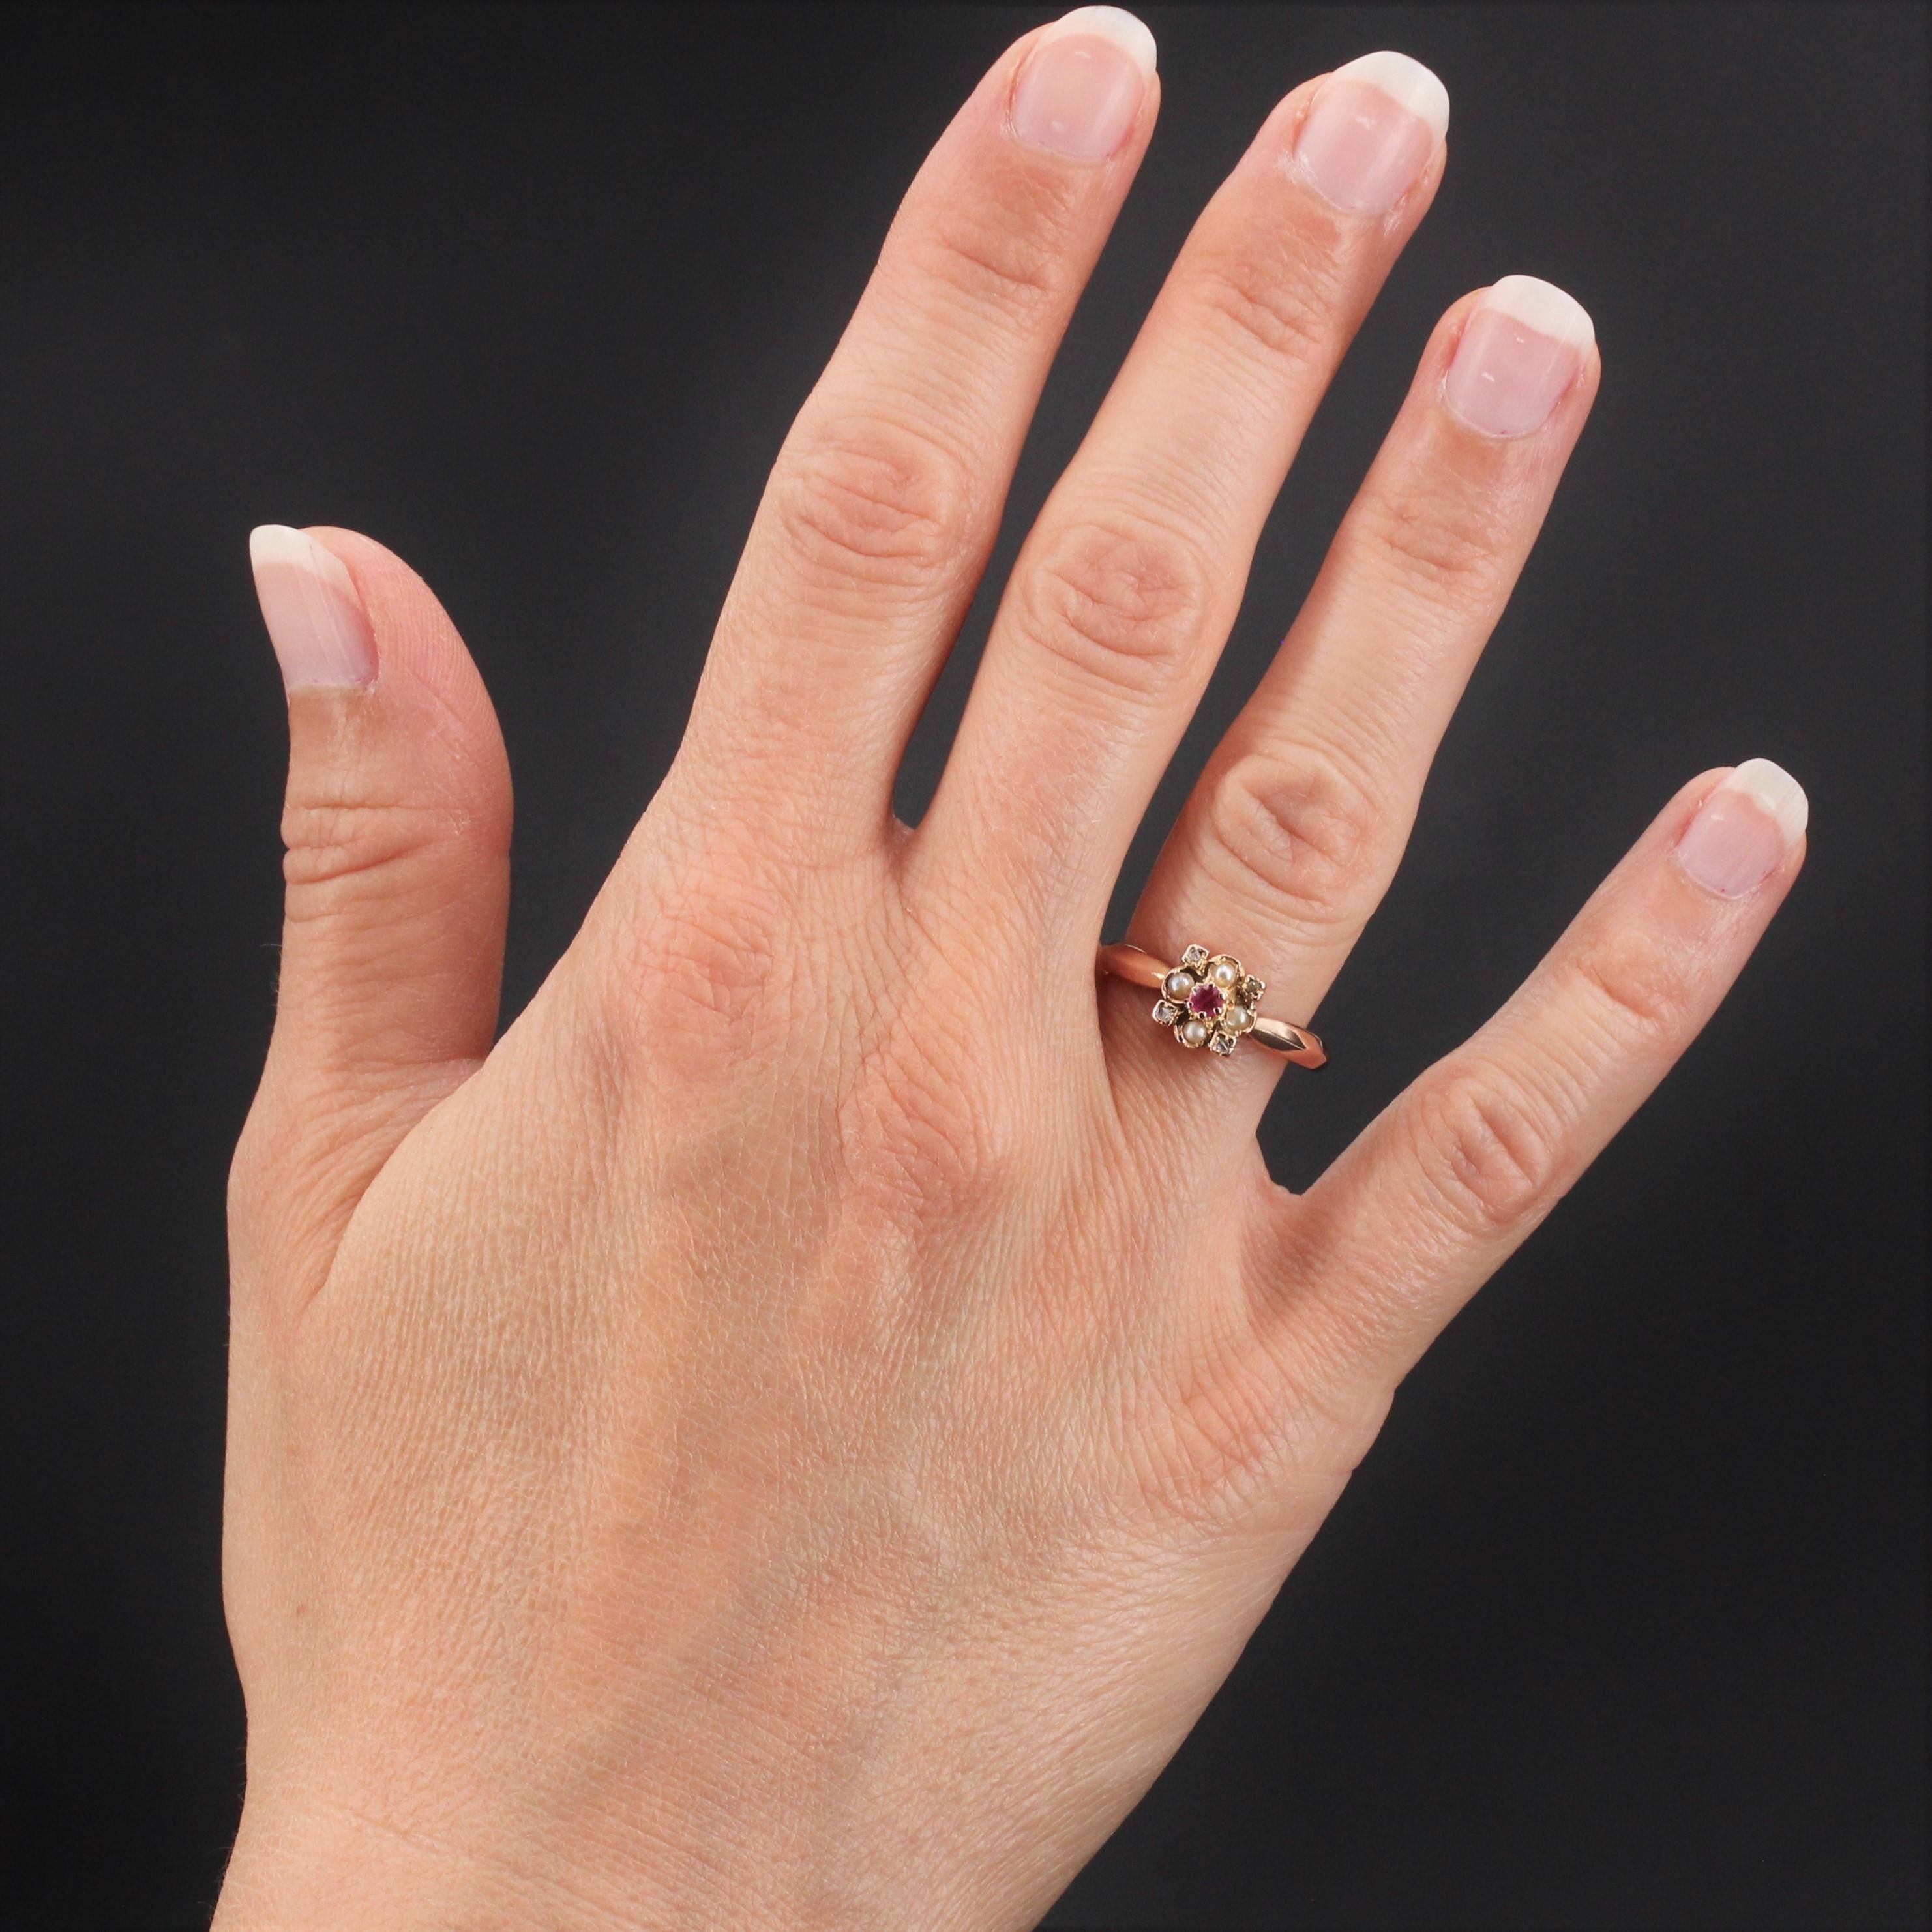 Ring in 18 karat rose gold, eagle head hallmark.
Thin antique ring, it is decorated with a polylobed pattern decorated with a ruby in the center surrounded by 4 natural half pearls and 4 rose- cut diamonds.
Height : 8 mm, width : 8 mm, thickness : 4